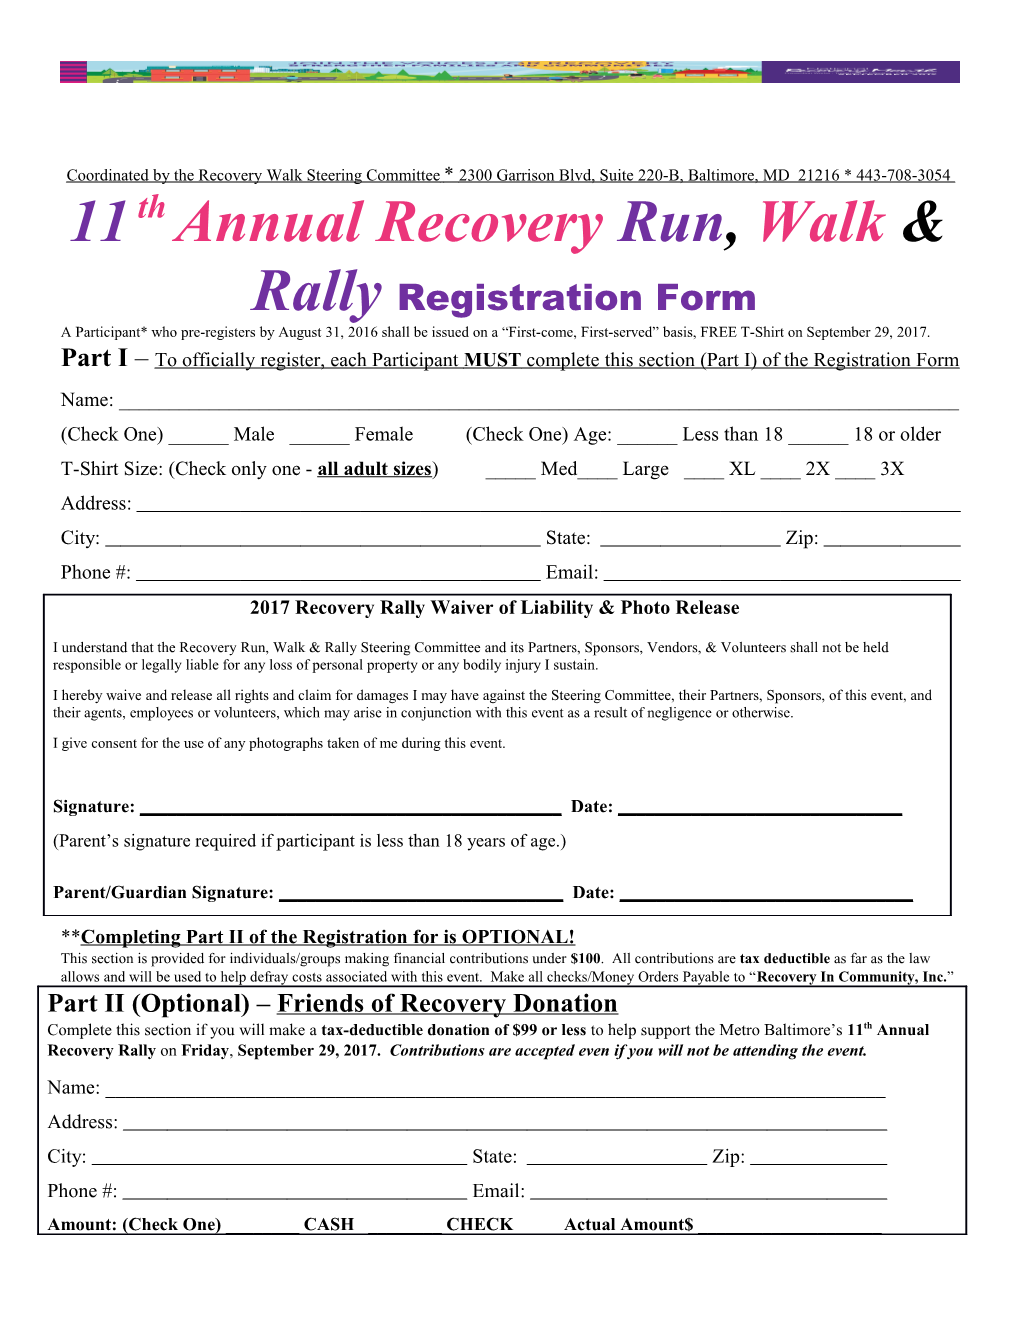 Coordinated by the Recovery Walk Steering Committee* 2300 Garrison Blvd, Suite 220-B, Baltimore